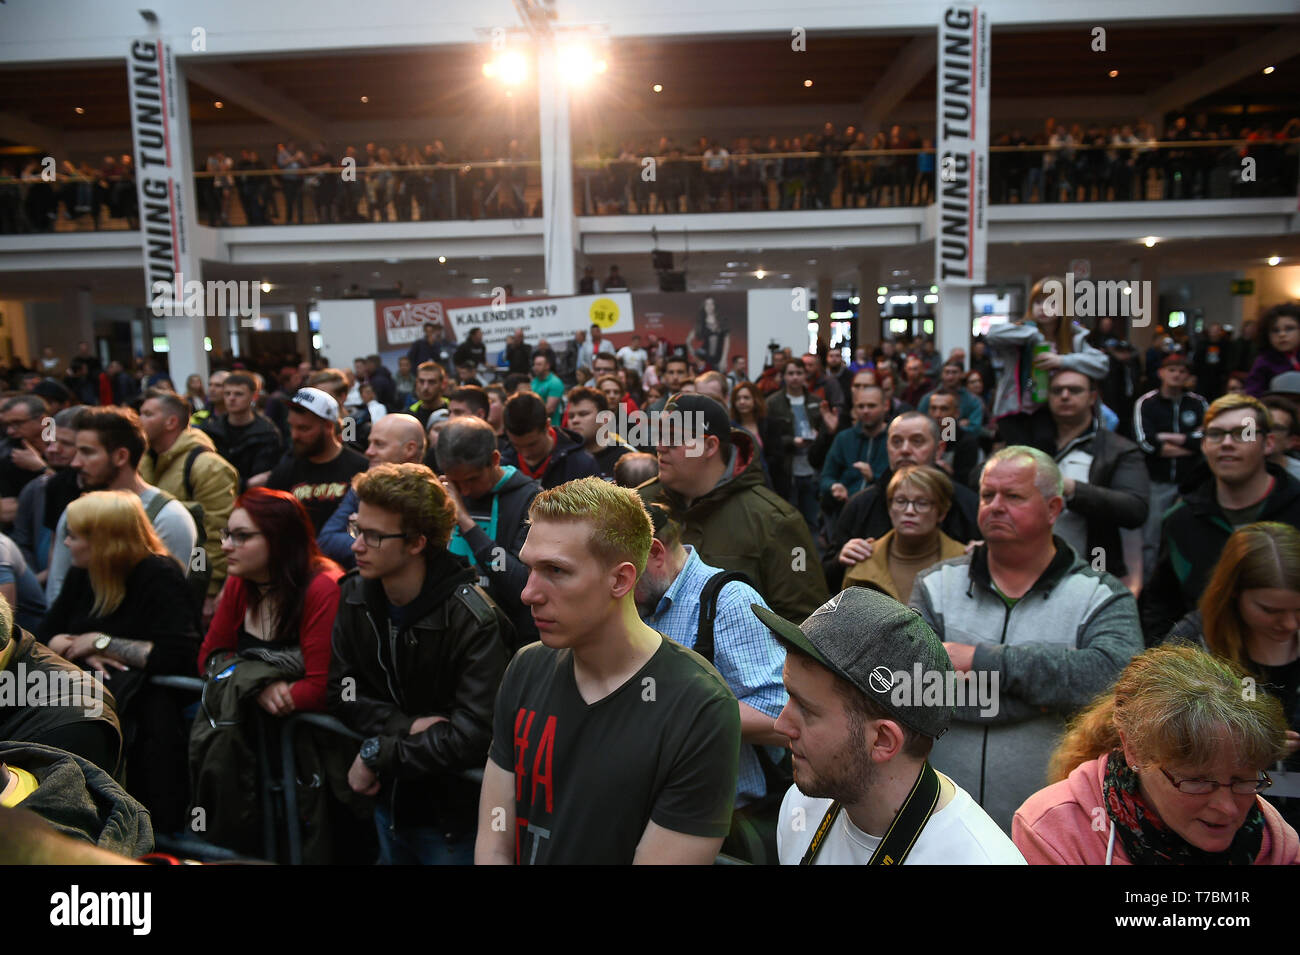 General view of public seen attending the Miss Tuning 2019 finale during Tuning World Bodensee 2019. The biggest Tuning fair in Europe with lots of activities and contests. The fair takes place in Friedrichshafen Messe, in Germany. Stock Photo